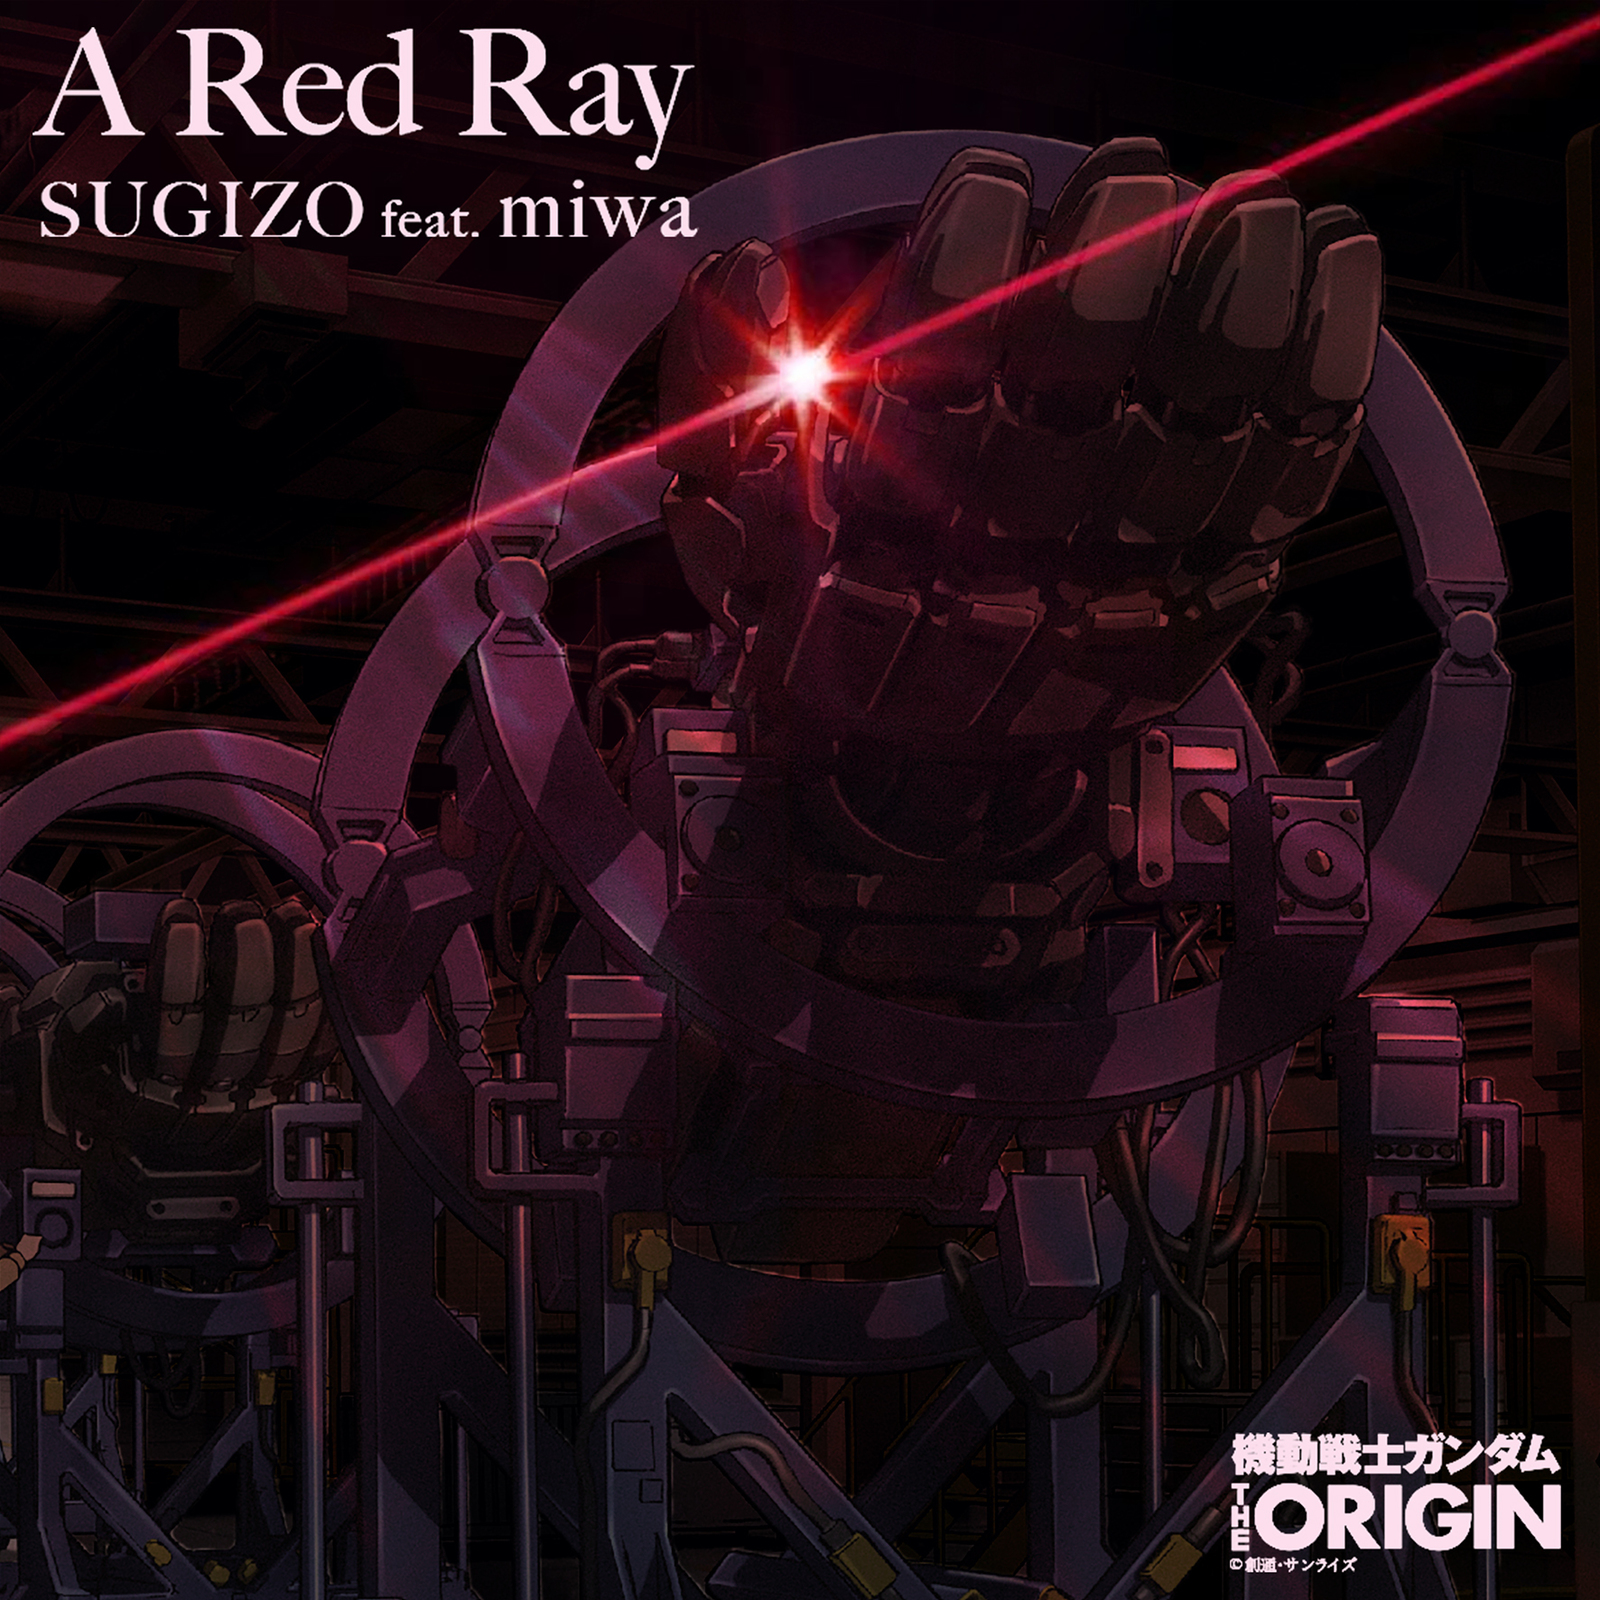 A Red Ray - Osanime